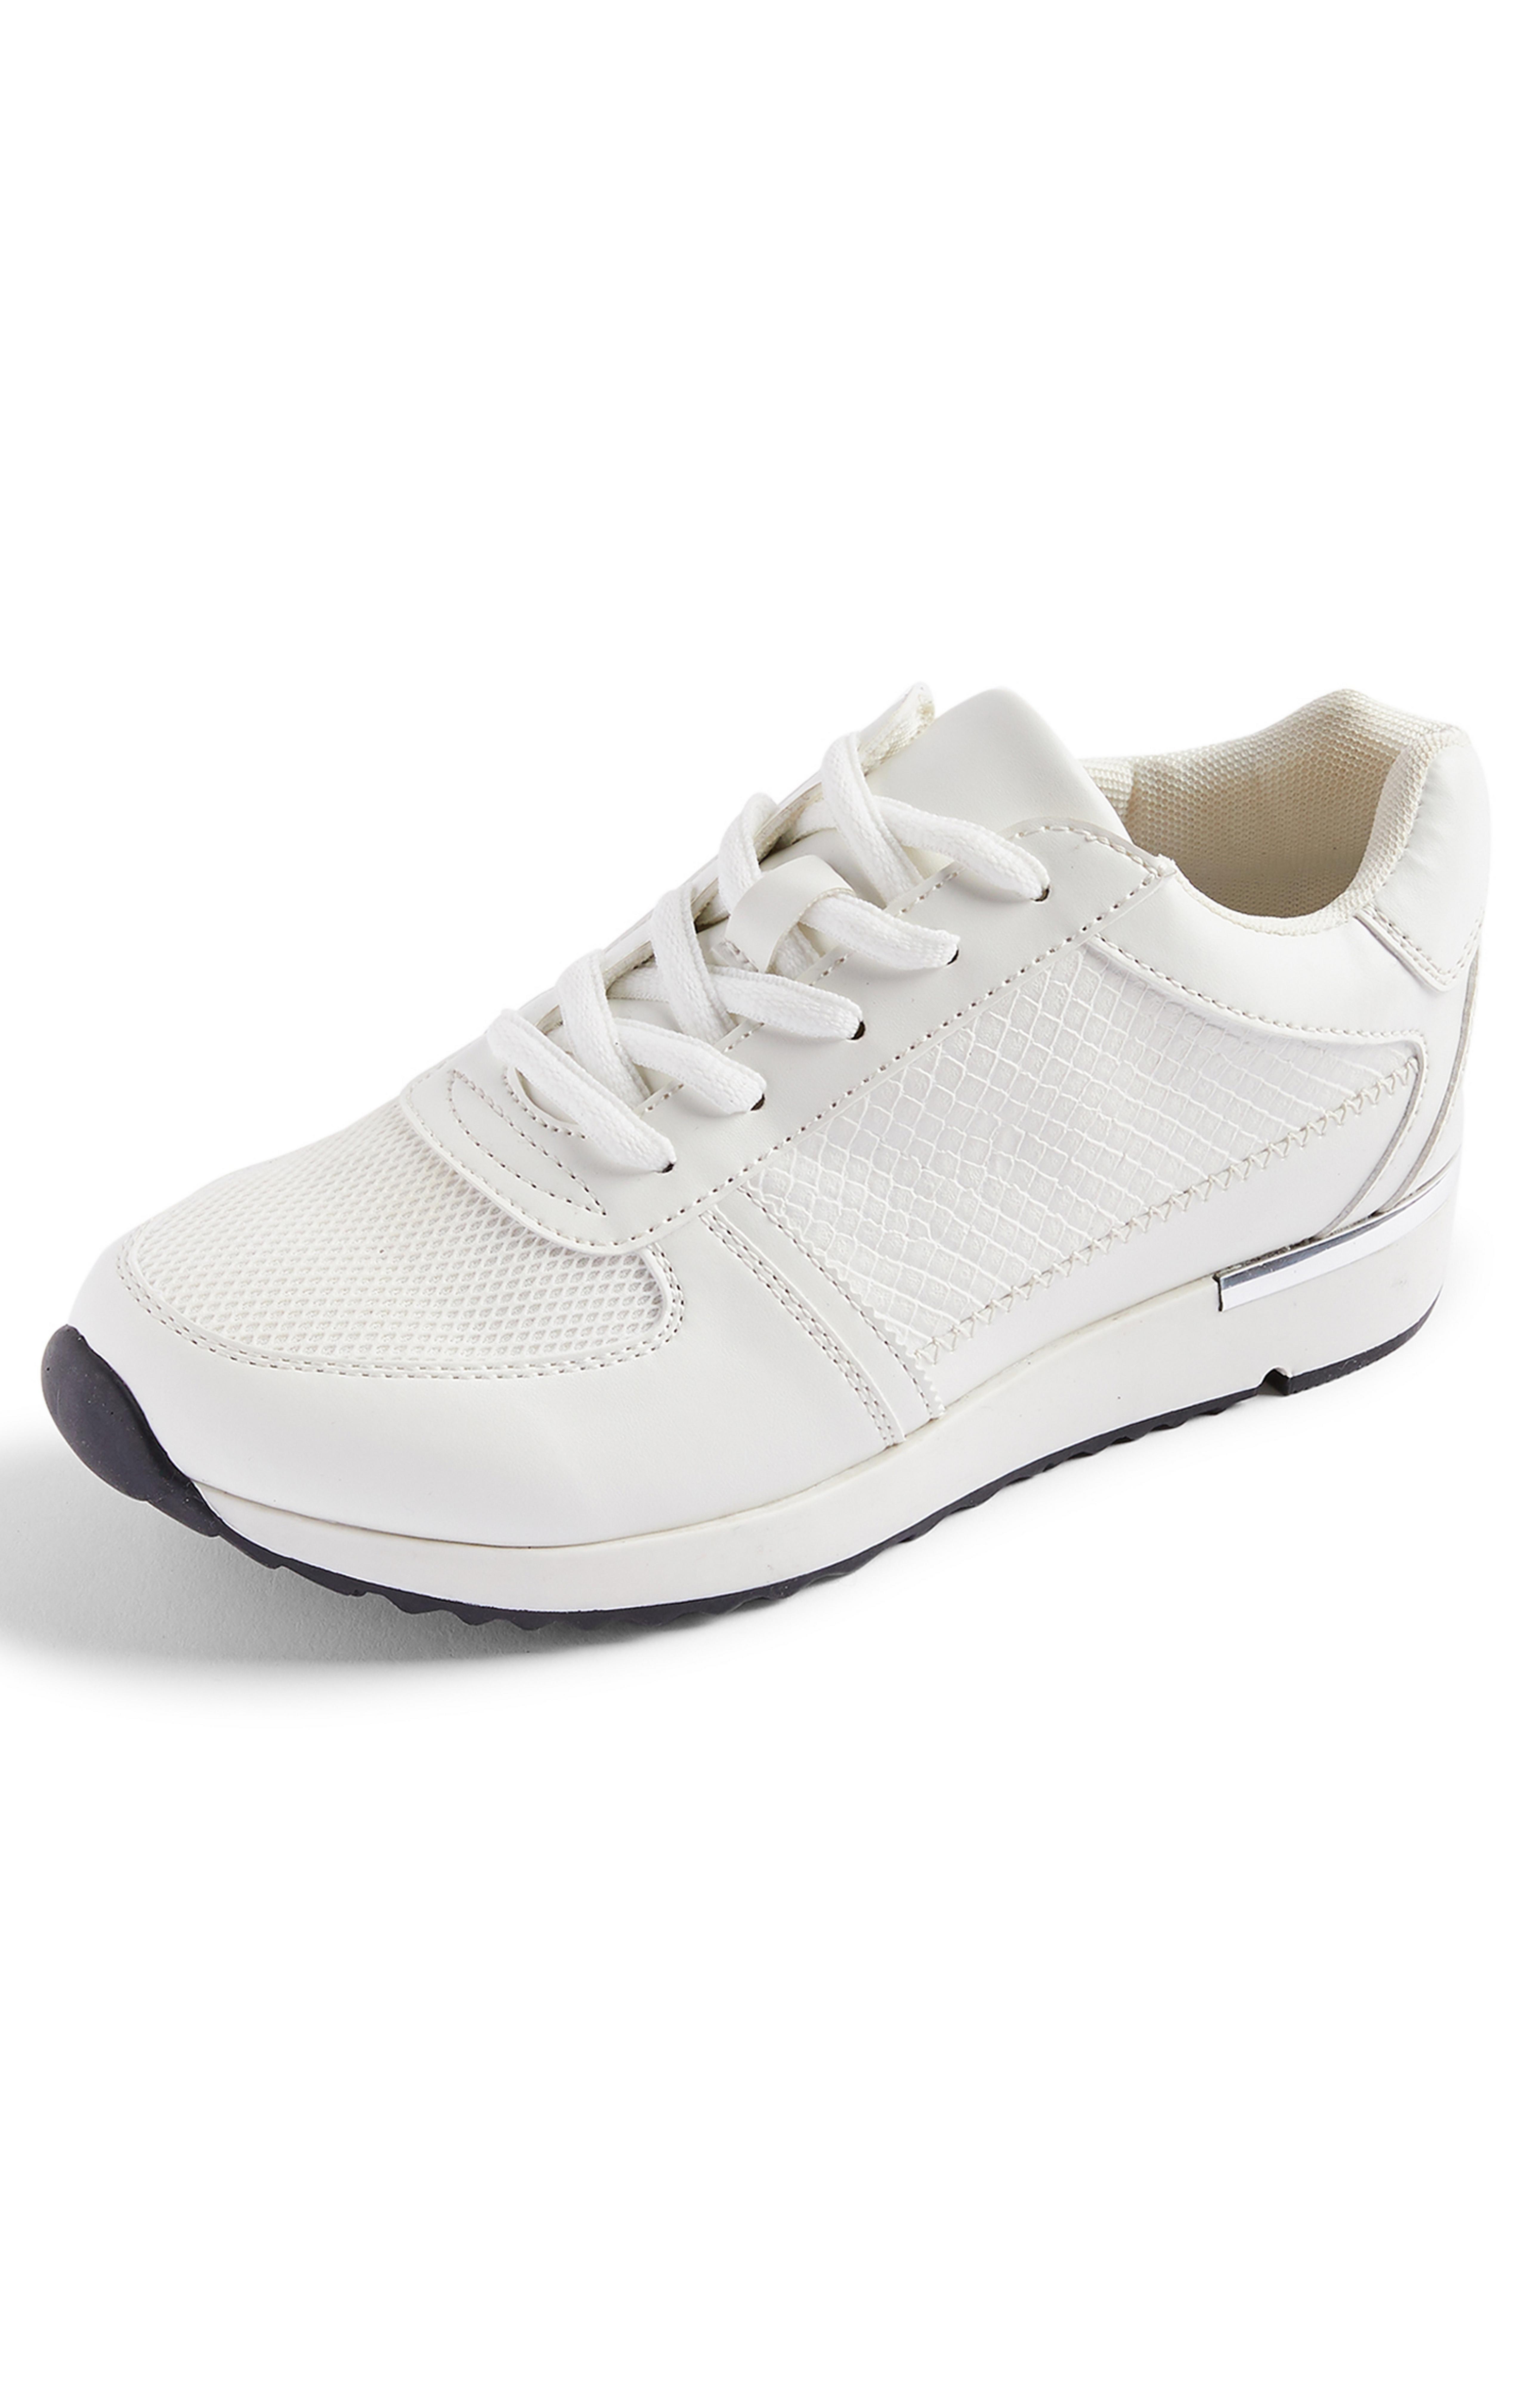 White Snakeskin Print With Metal Detail Trainer | Women's Trainers ...